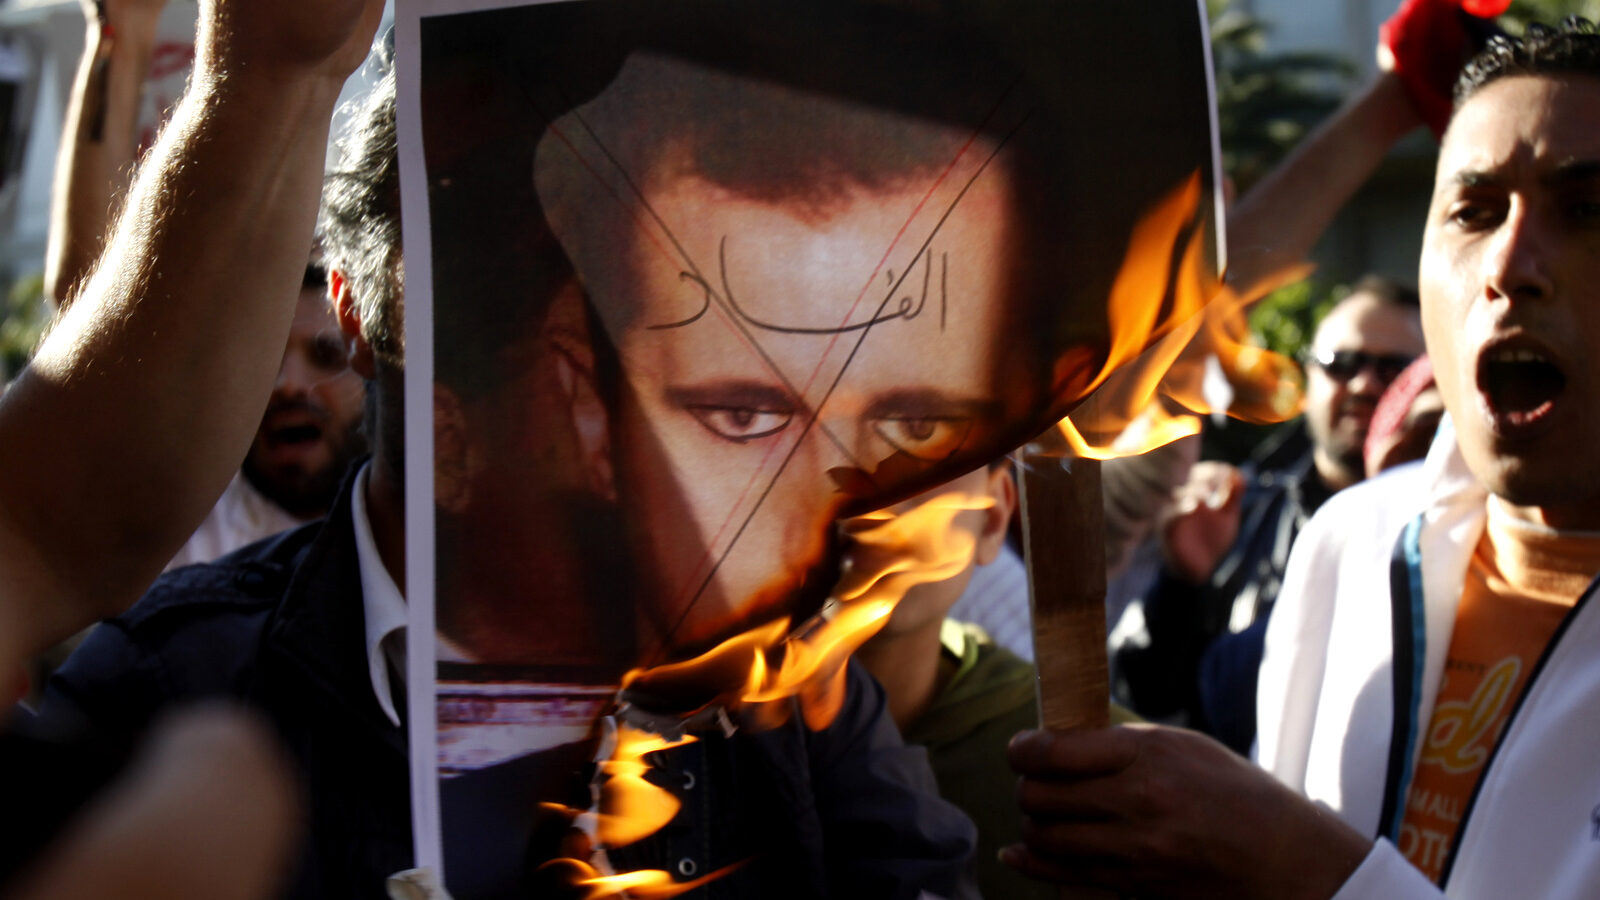 Anti-Assad protesters burn a picture of Syrian President Bashar al-Assad with 'Corruption' written across his face. (AP/Kostas Tsironis)